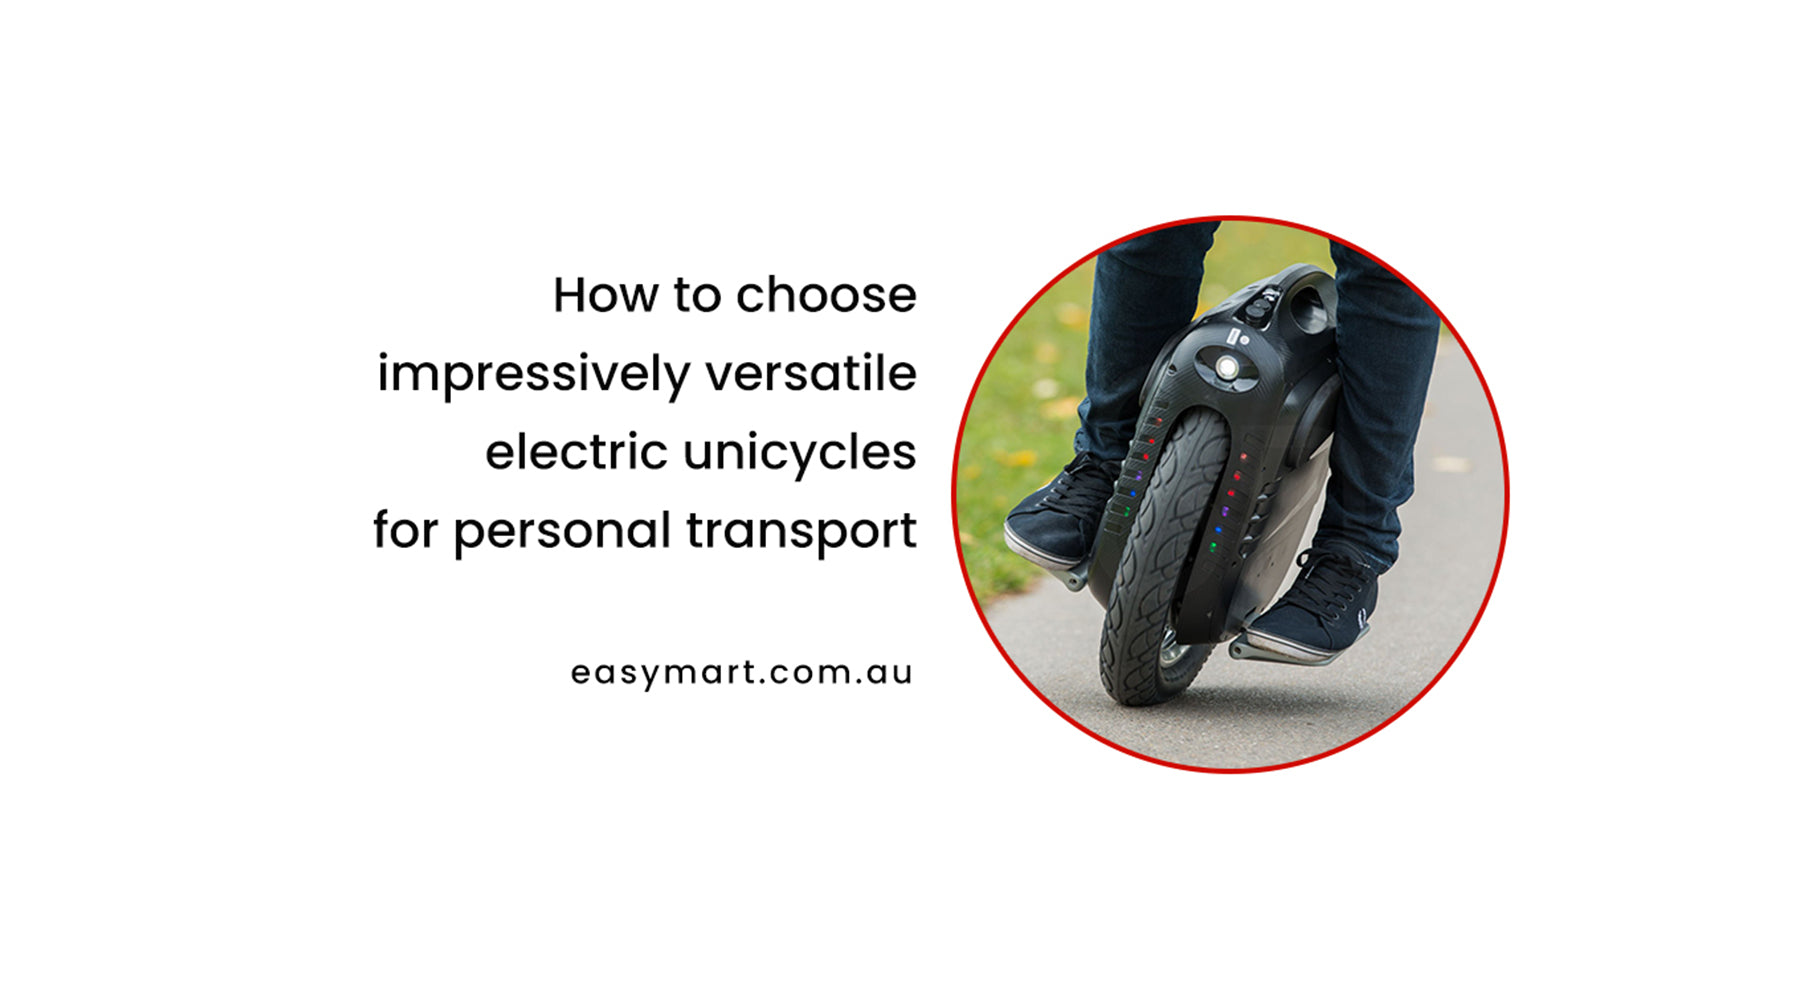 How to choose impressively versatile electric unicycles for personal transport